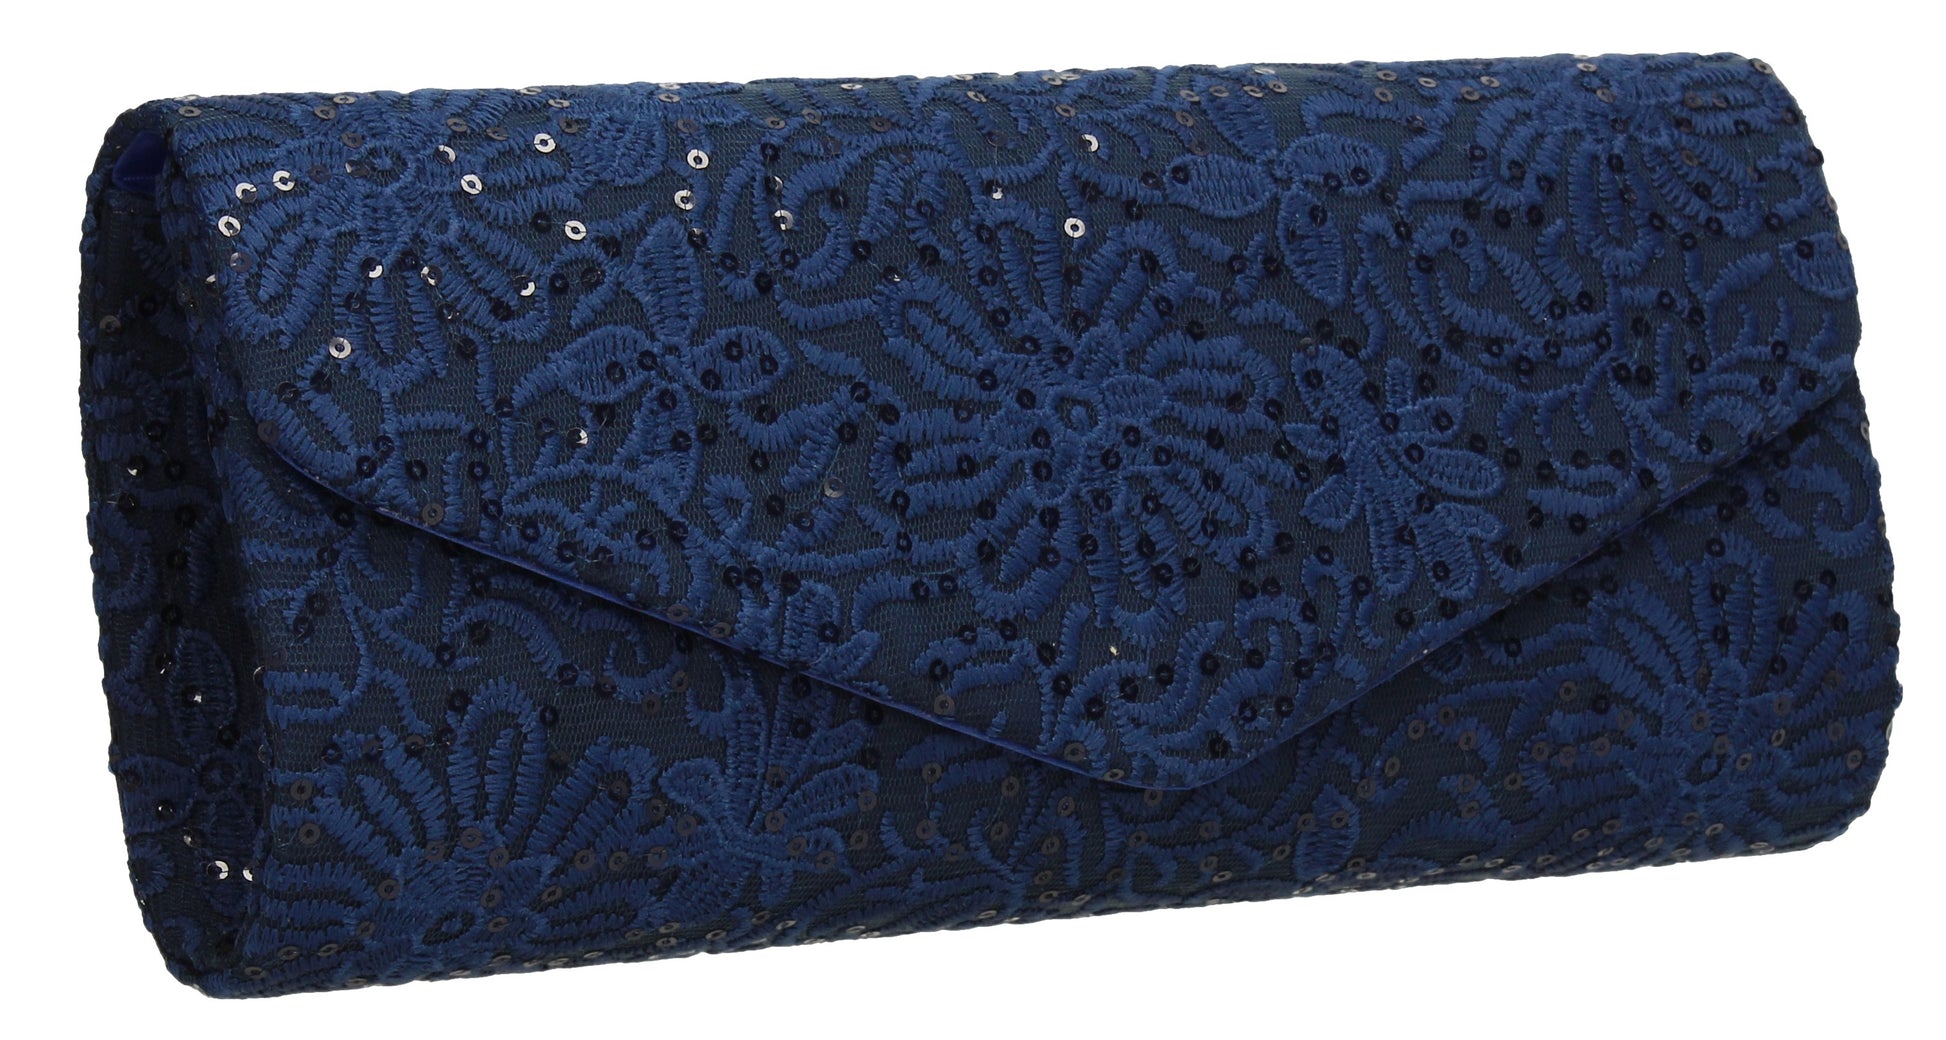 SWANKYSWANS Julia Lace Sequin Clutch Bag Navy Cute Cheap Clutch Bag For Weddings School and Work